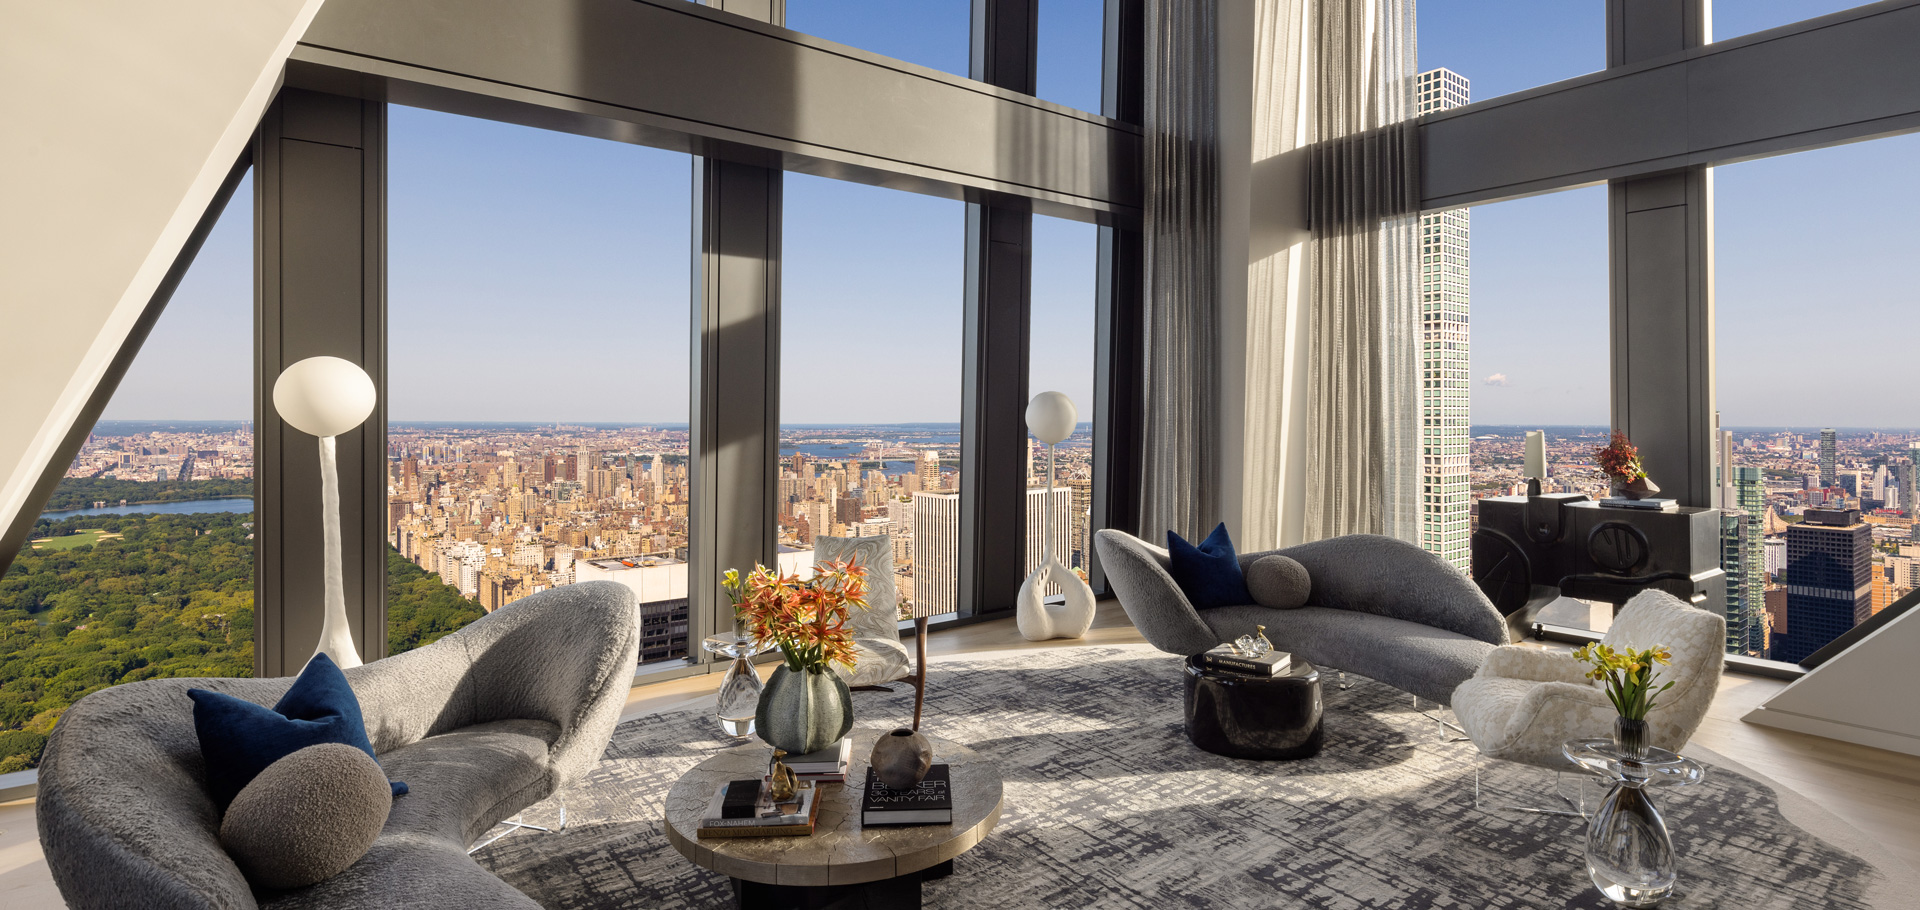 Hines Collective Creates an Artful Museum Tower Apartment